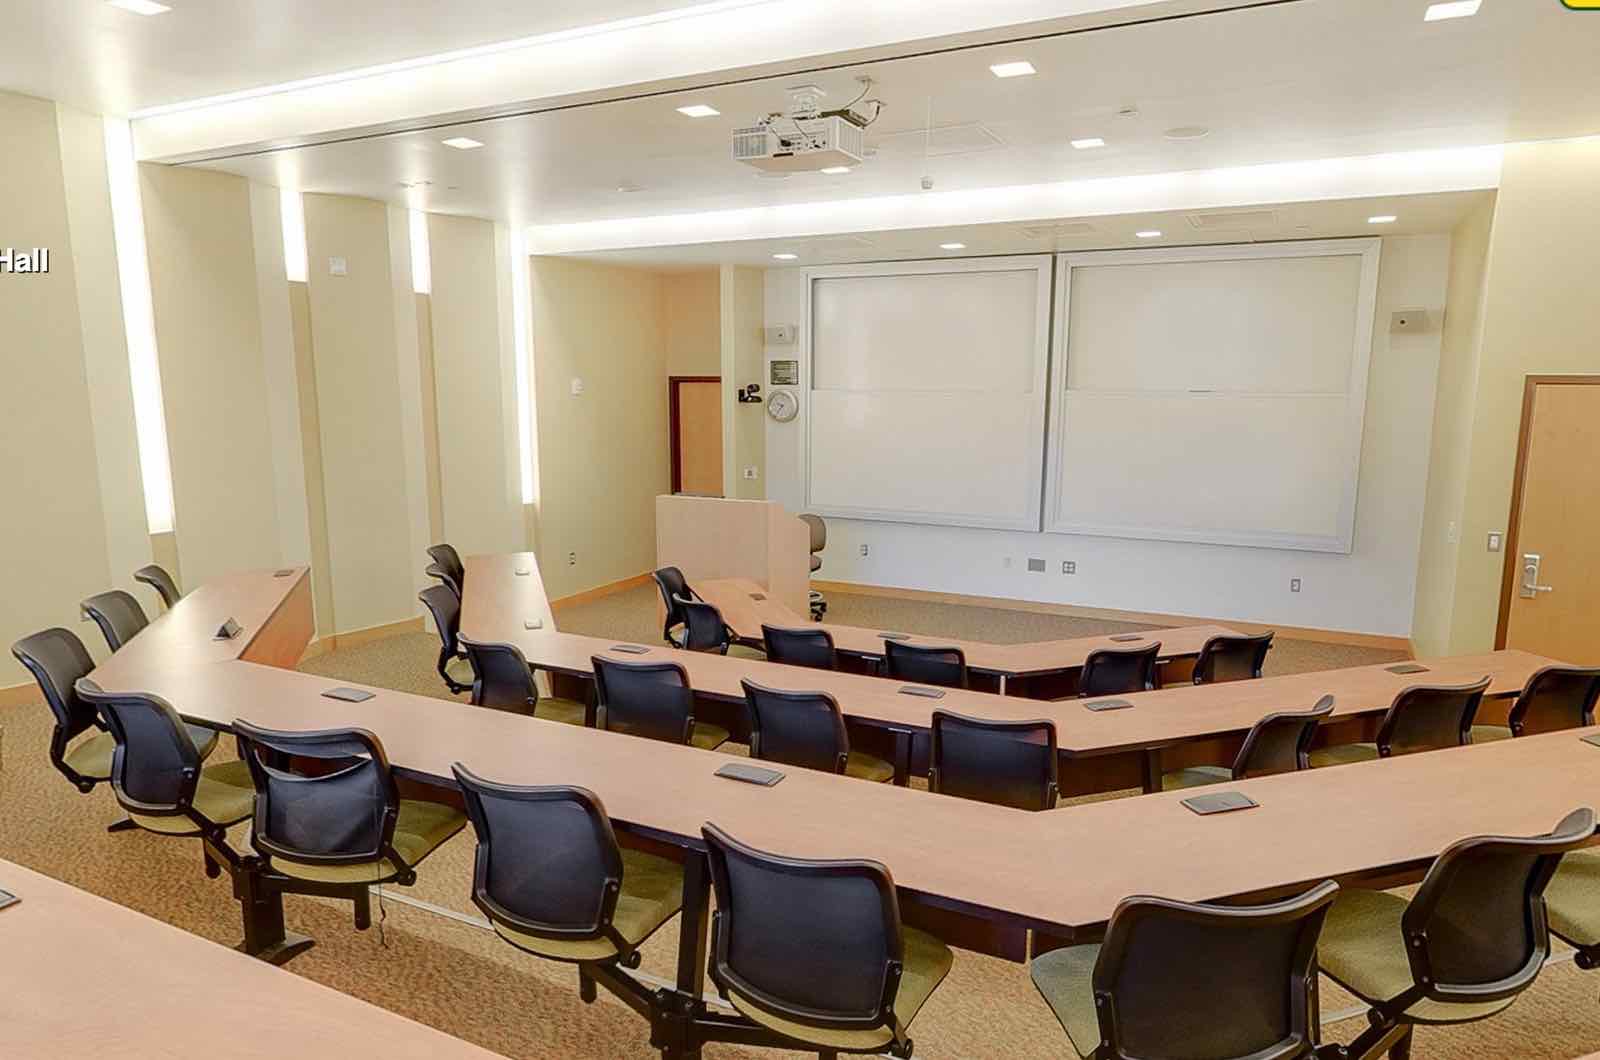 360 Virtual Tours for Classroom Layouts at Colleges and Universities